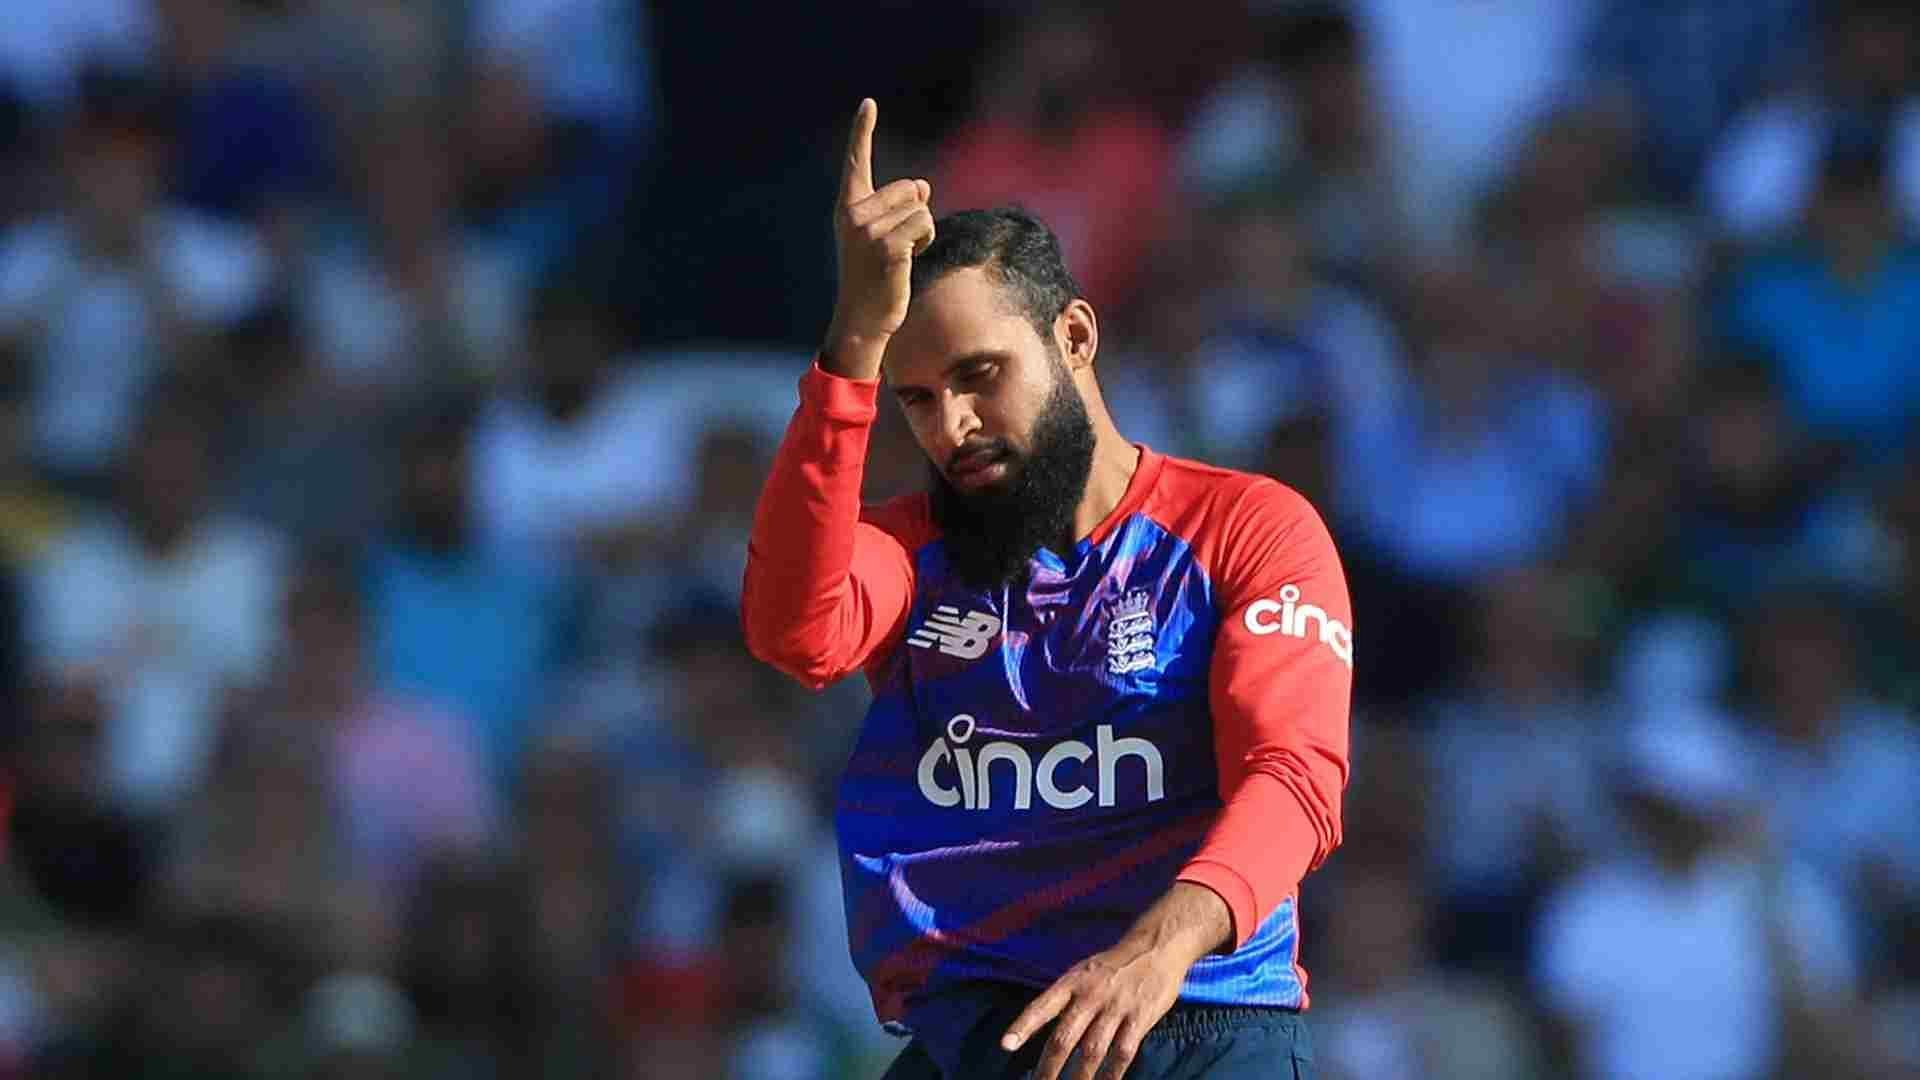 Adil Rashid will pique the interest of a few teams during the IPL 2022 Auction